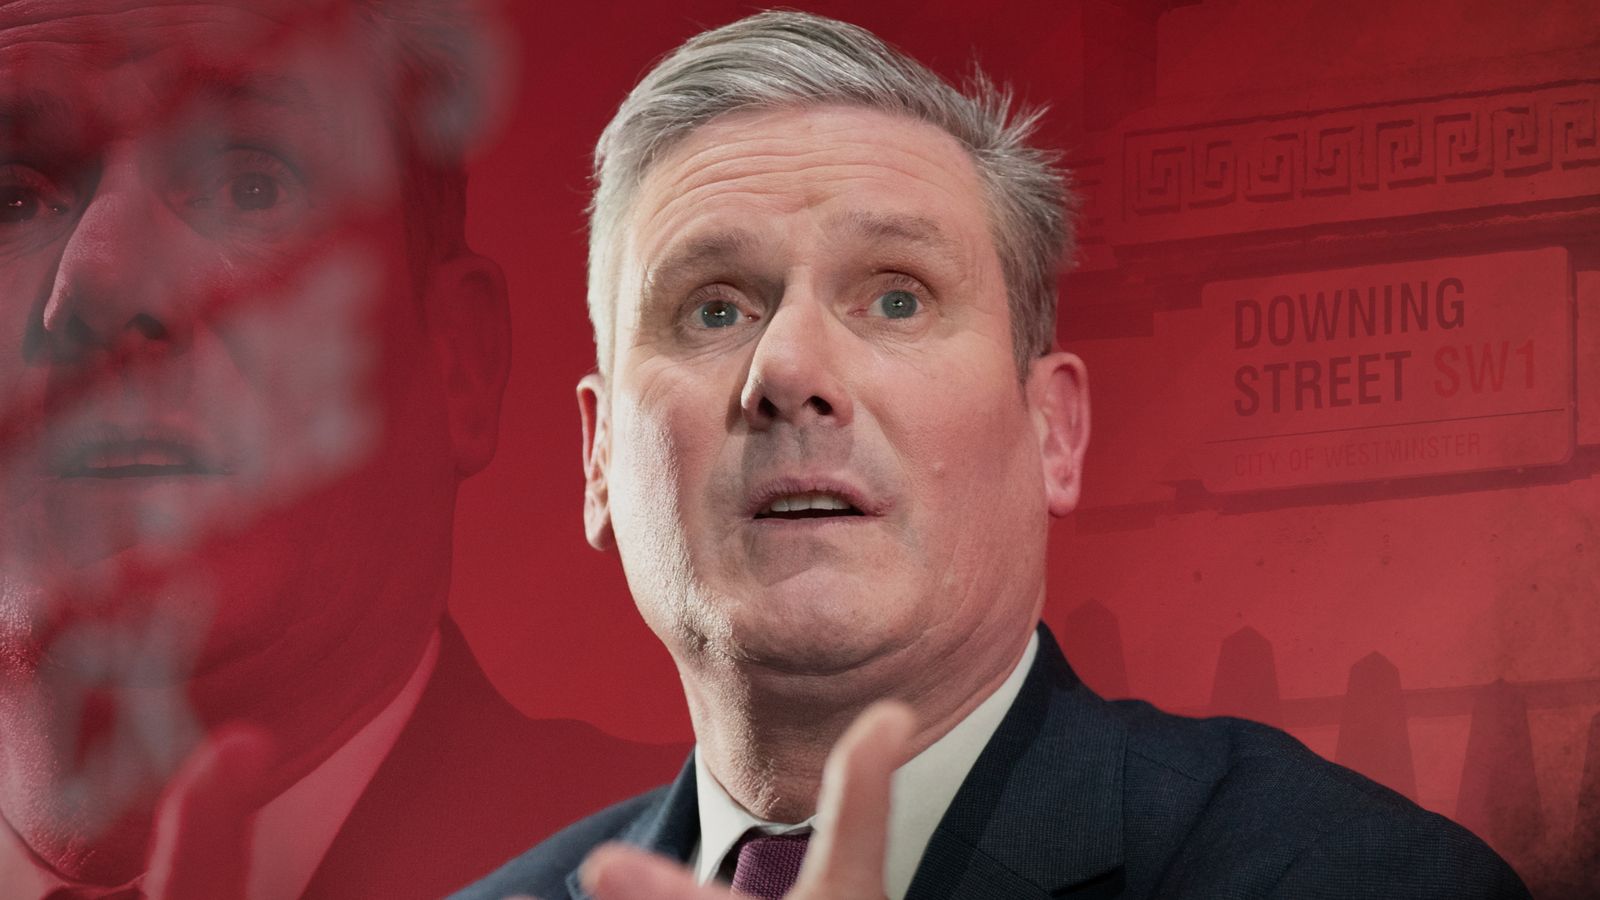 The Prime Minister In Waiting - but who really is Keir Starmer?